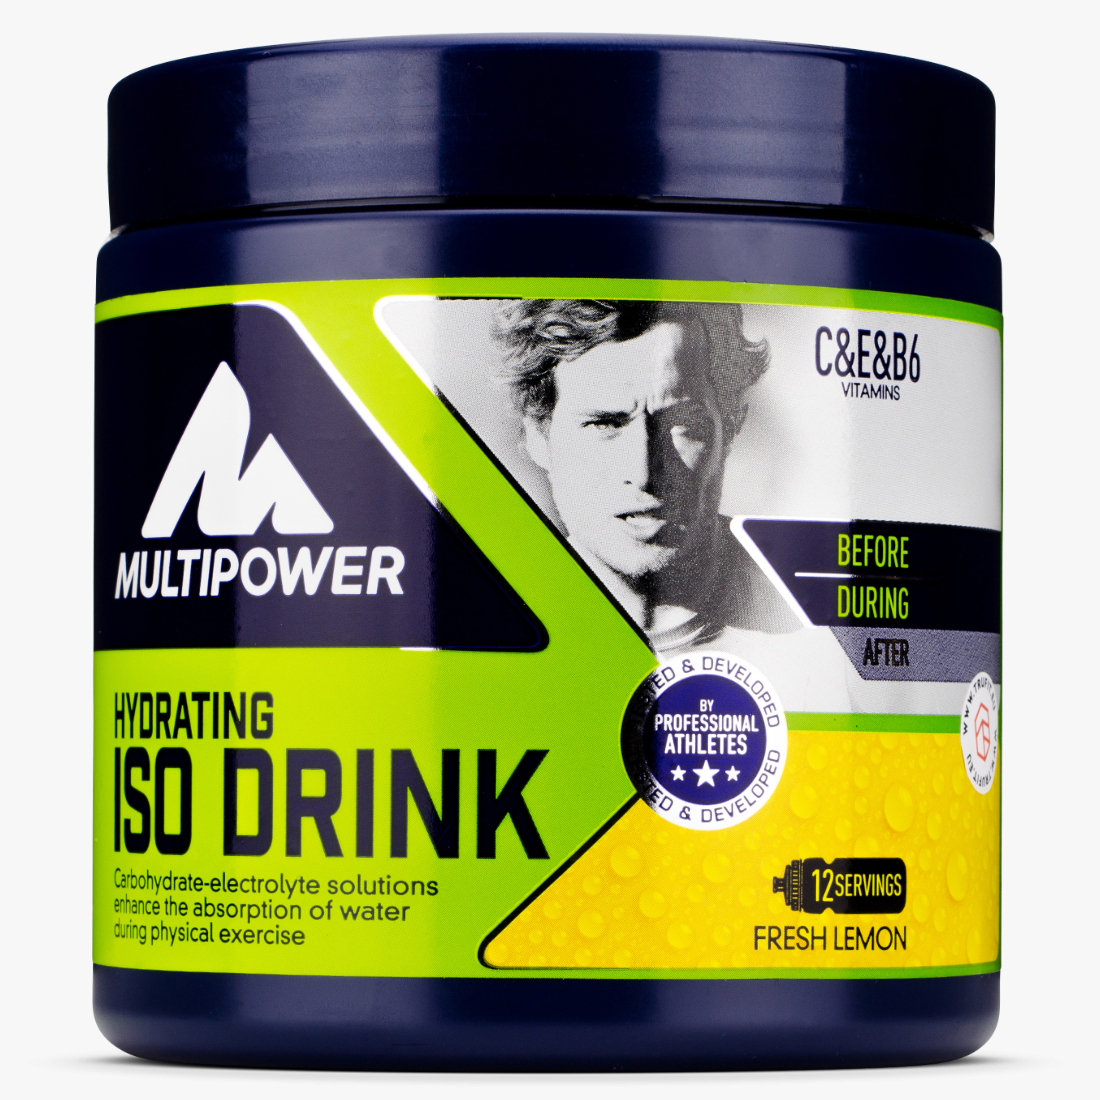 Multipower - Hydrating ISO Drink - For optimum hydration - TRU·FIT